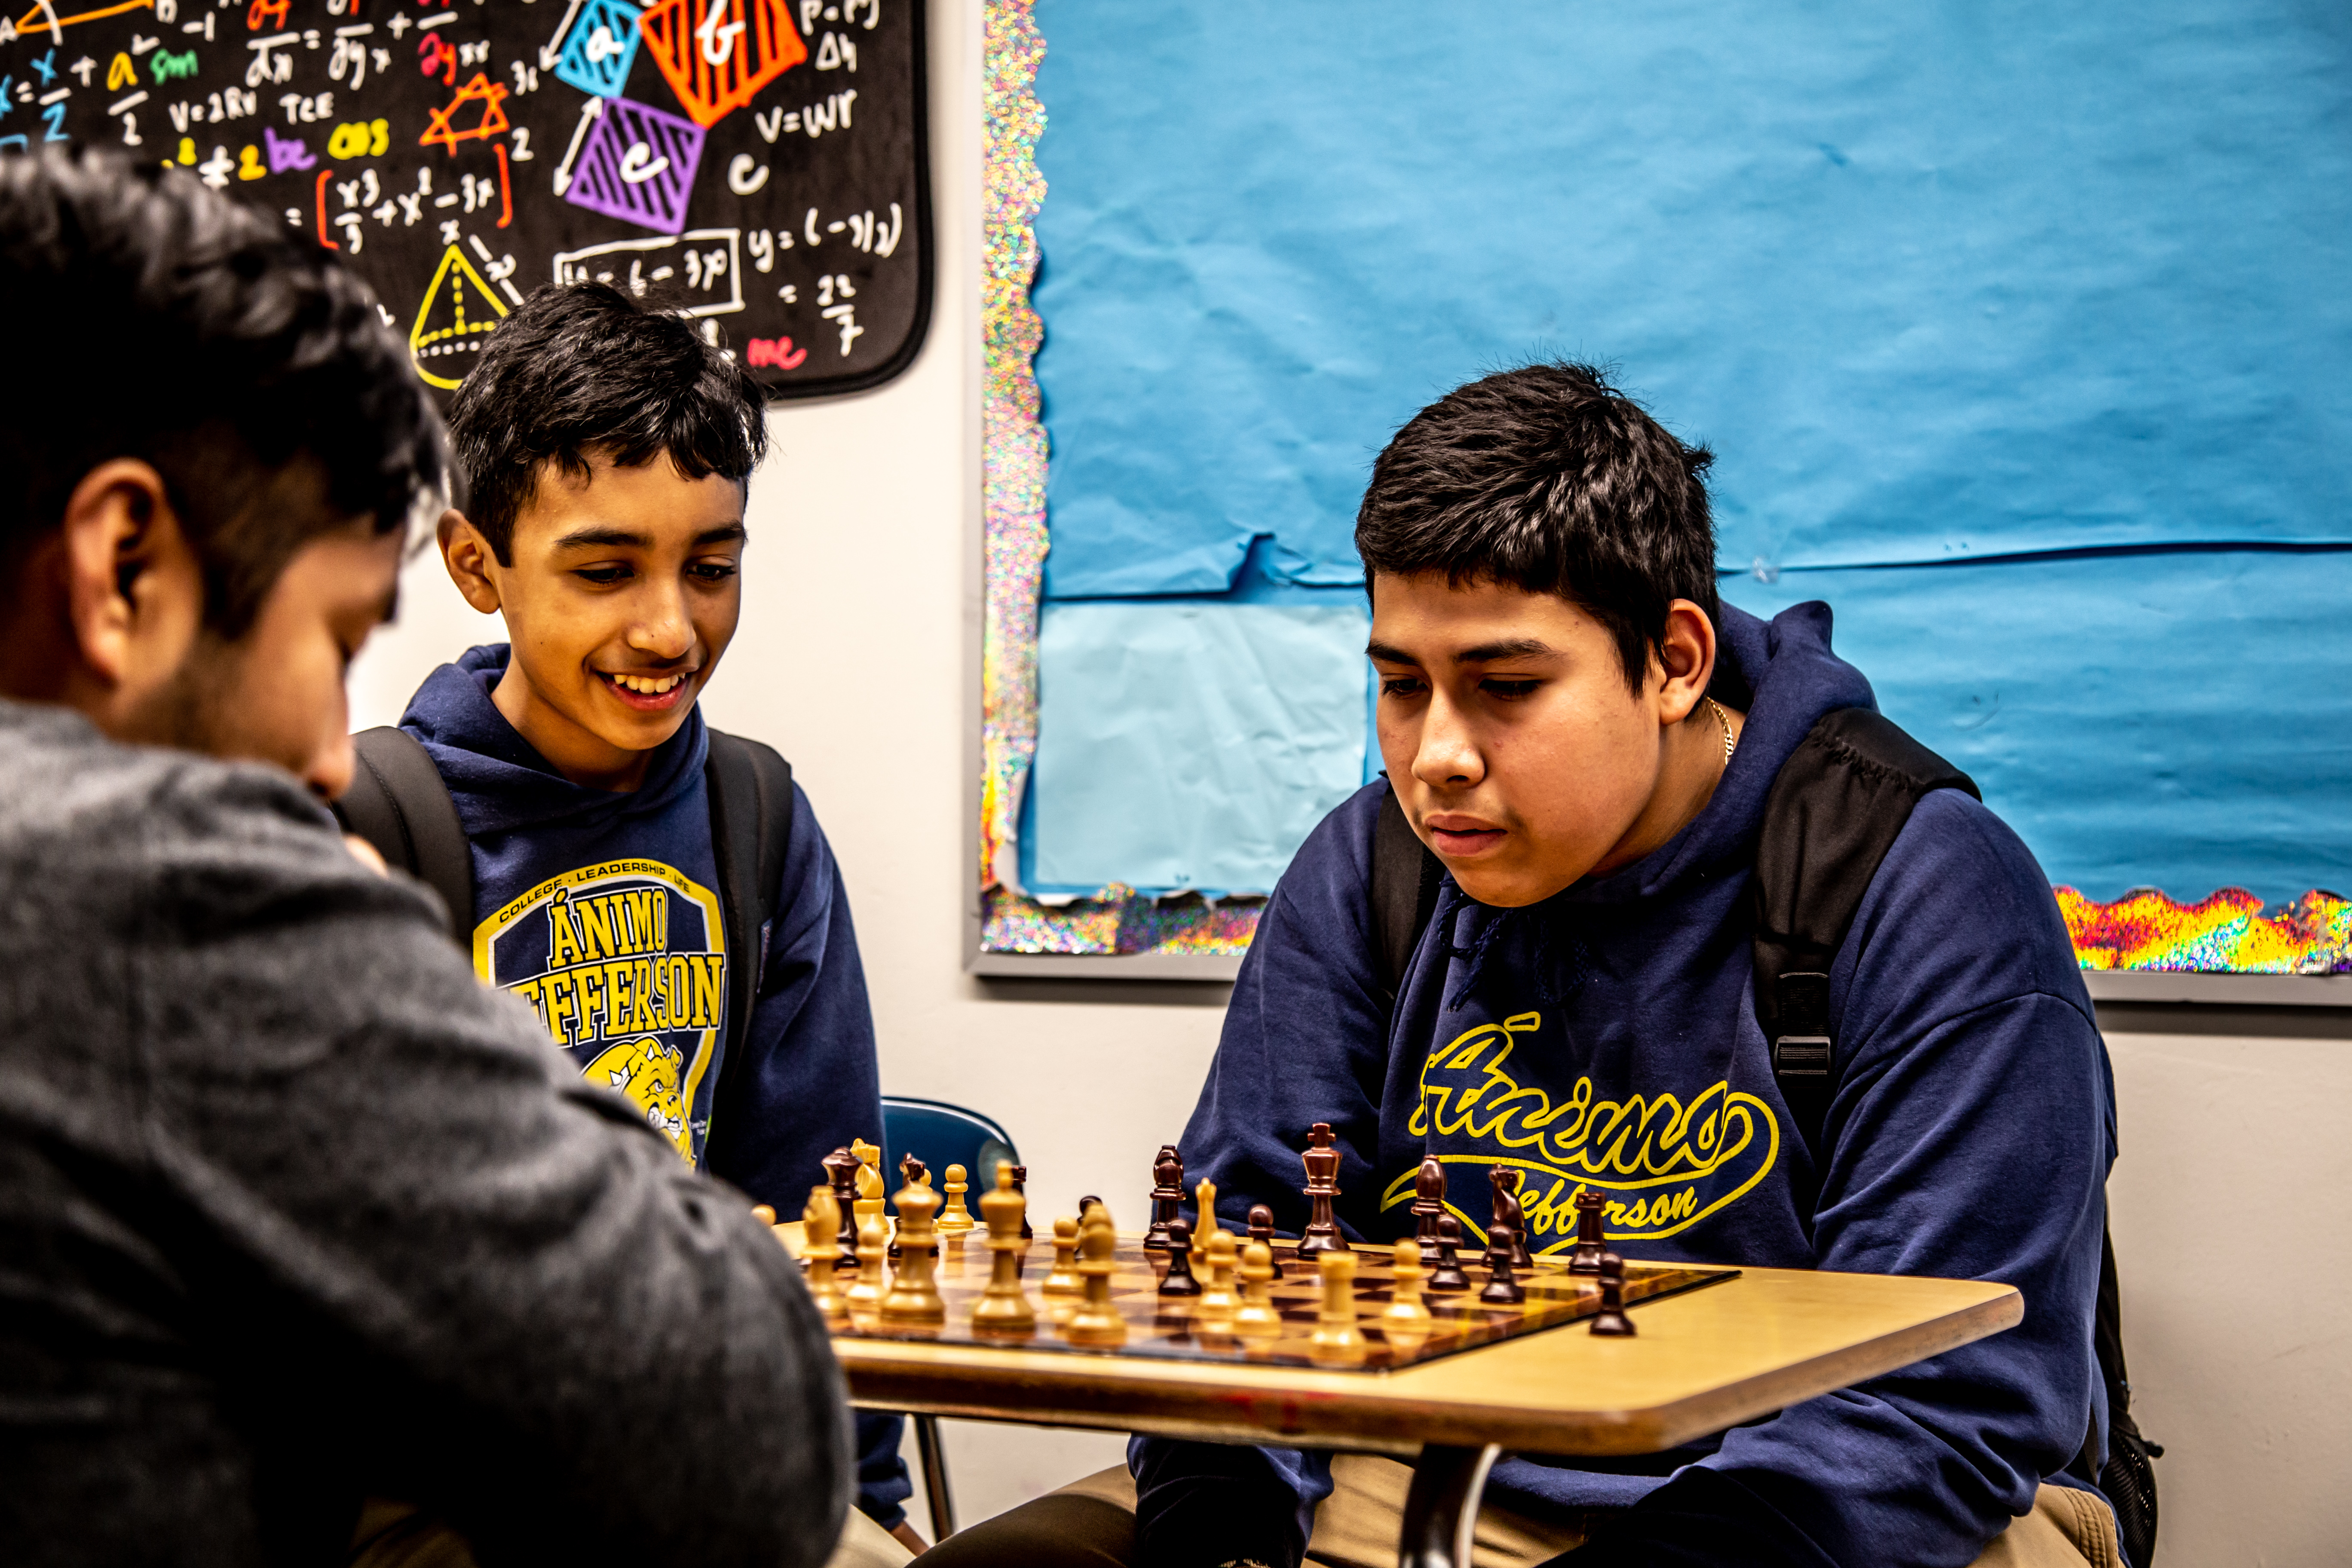 How One Math Lesson Turned Into a Chess Club – Updates from Green